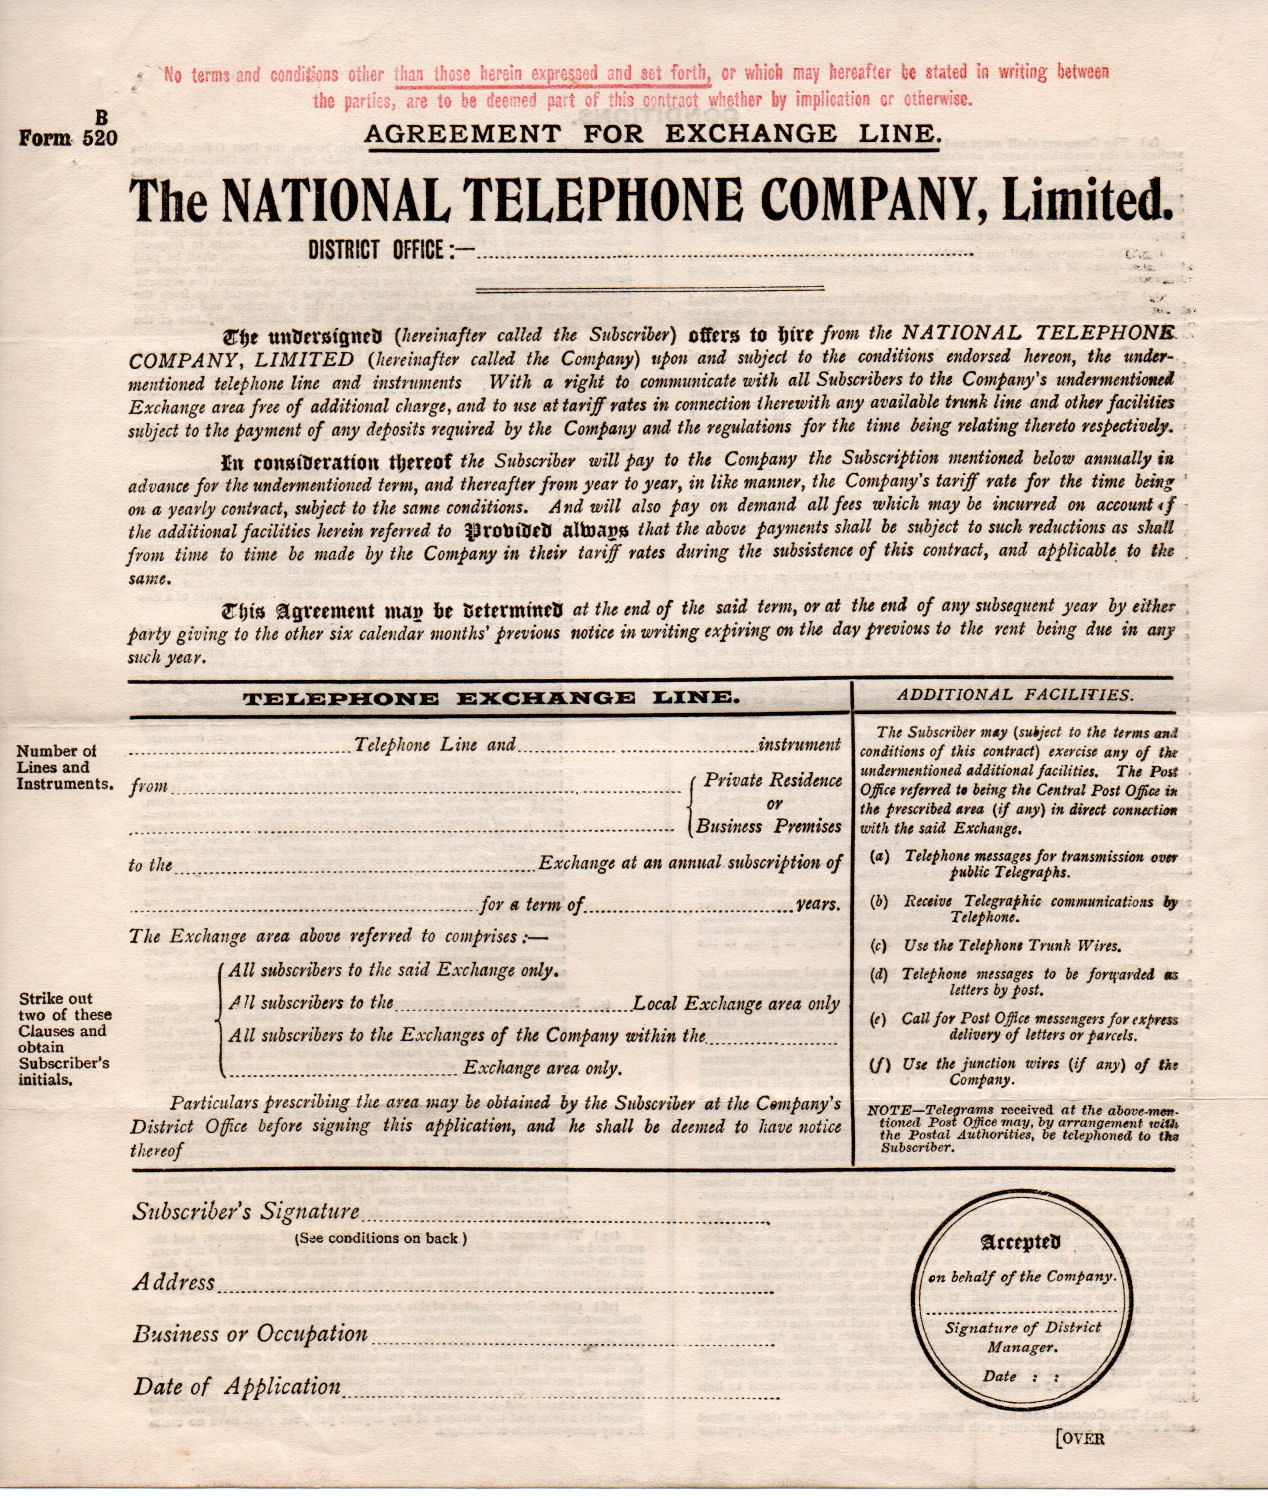 National Telephone Co. Agreement.